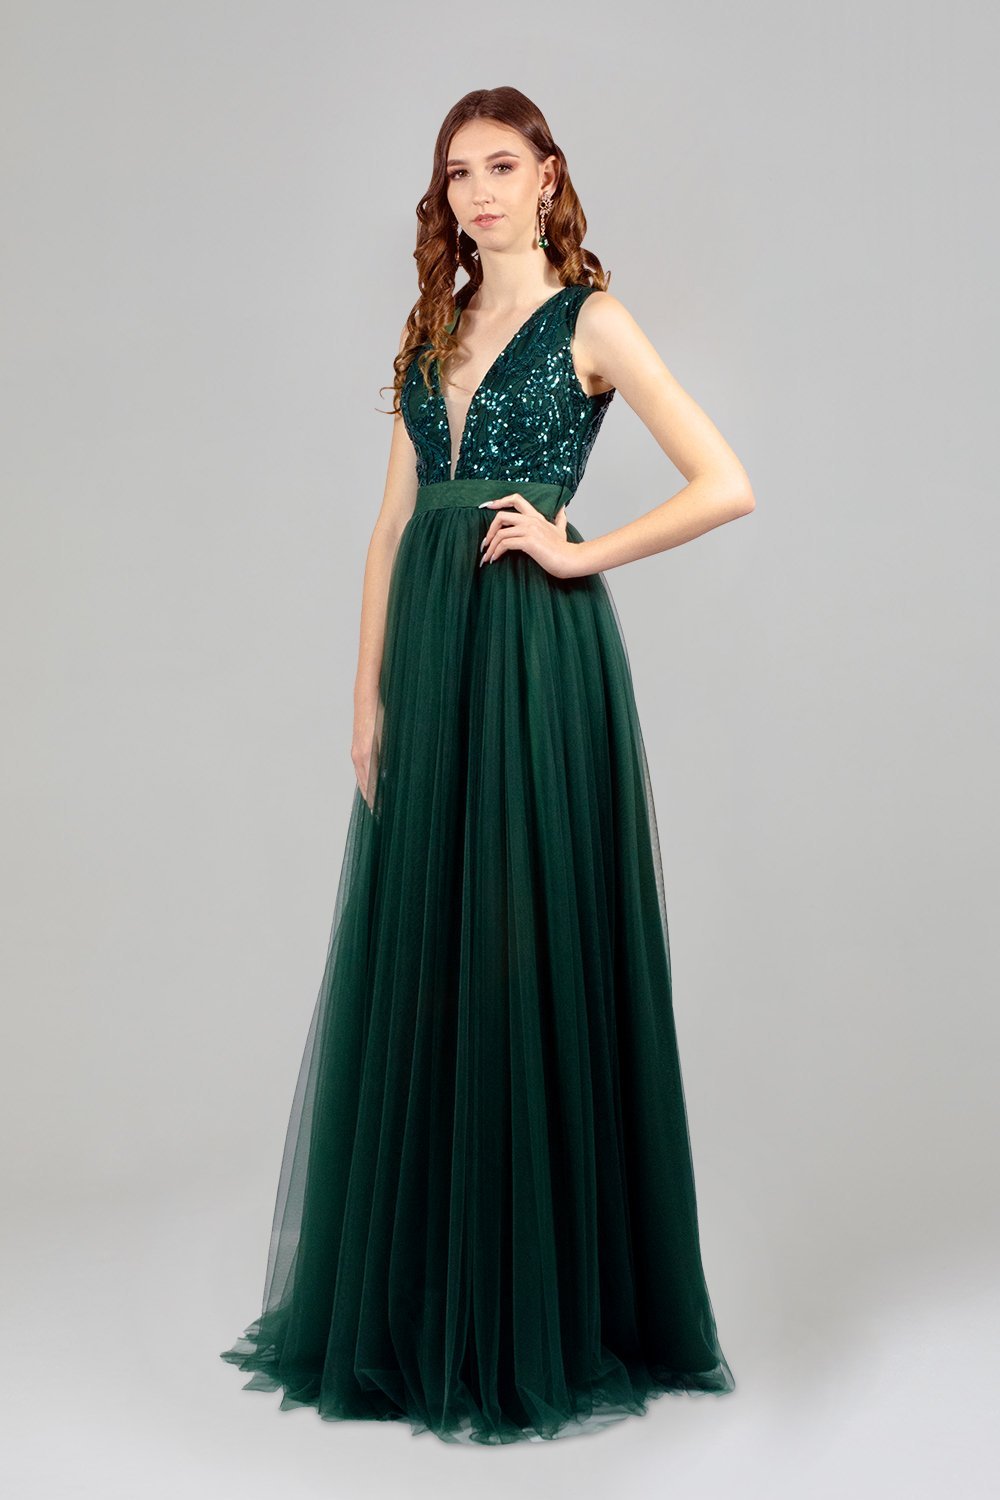 Emerald Green Ball Gown Quinceanera Dresses With Detachable Cape Appli –  formalgowns